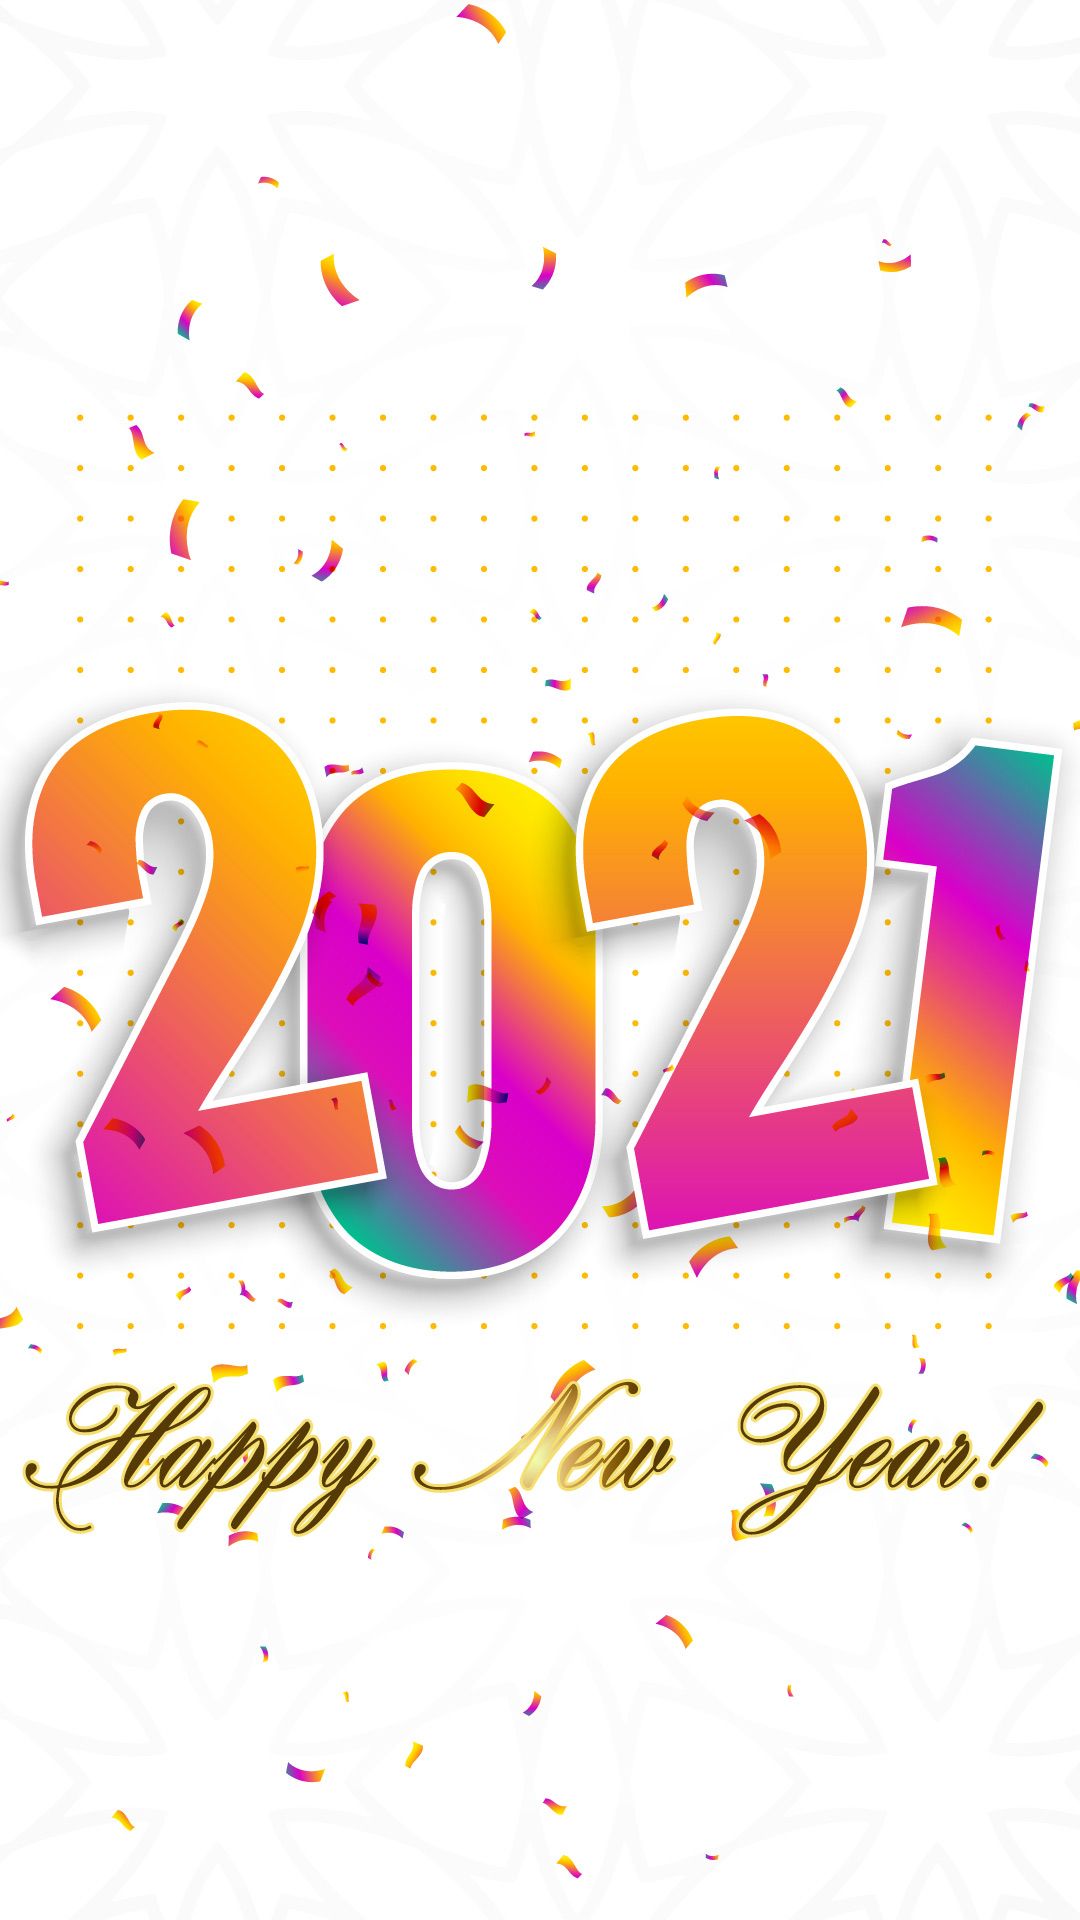 Happy New Year 2021 Holiday Wallpapers